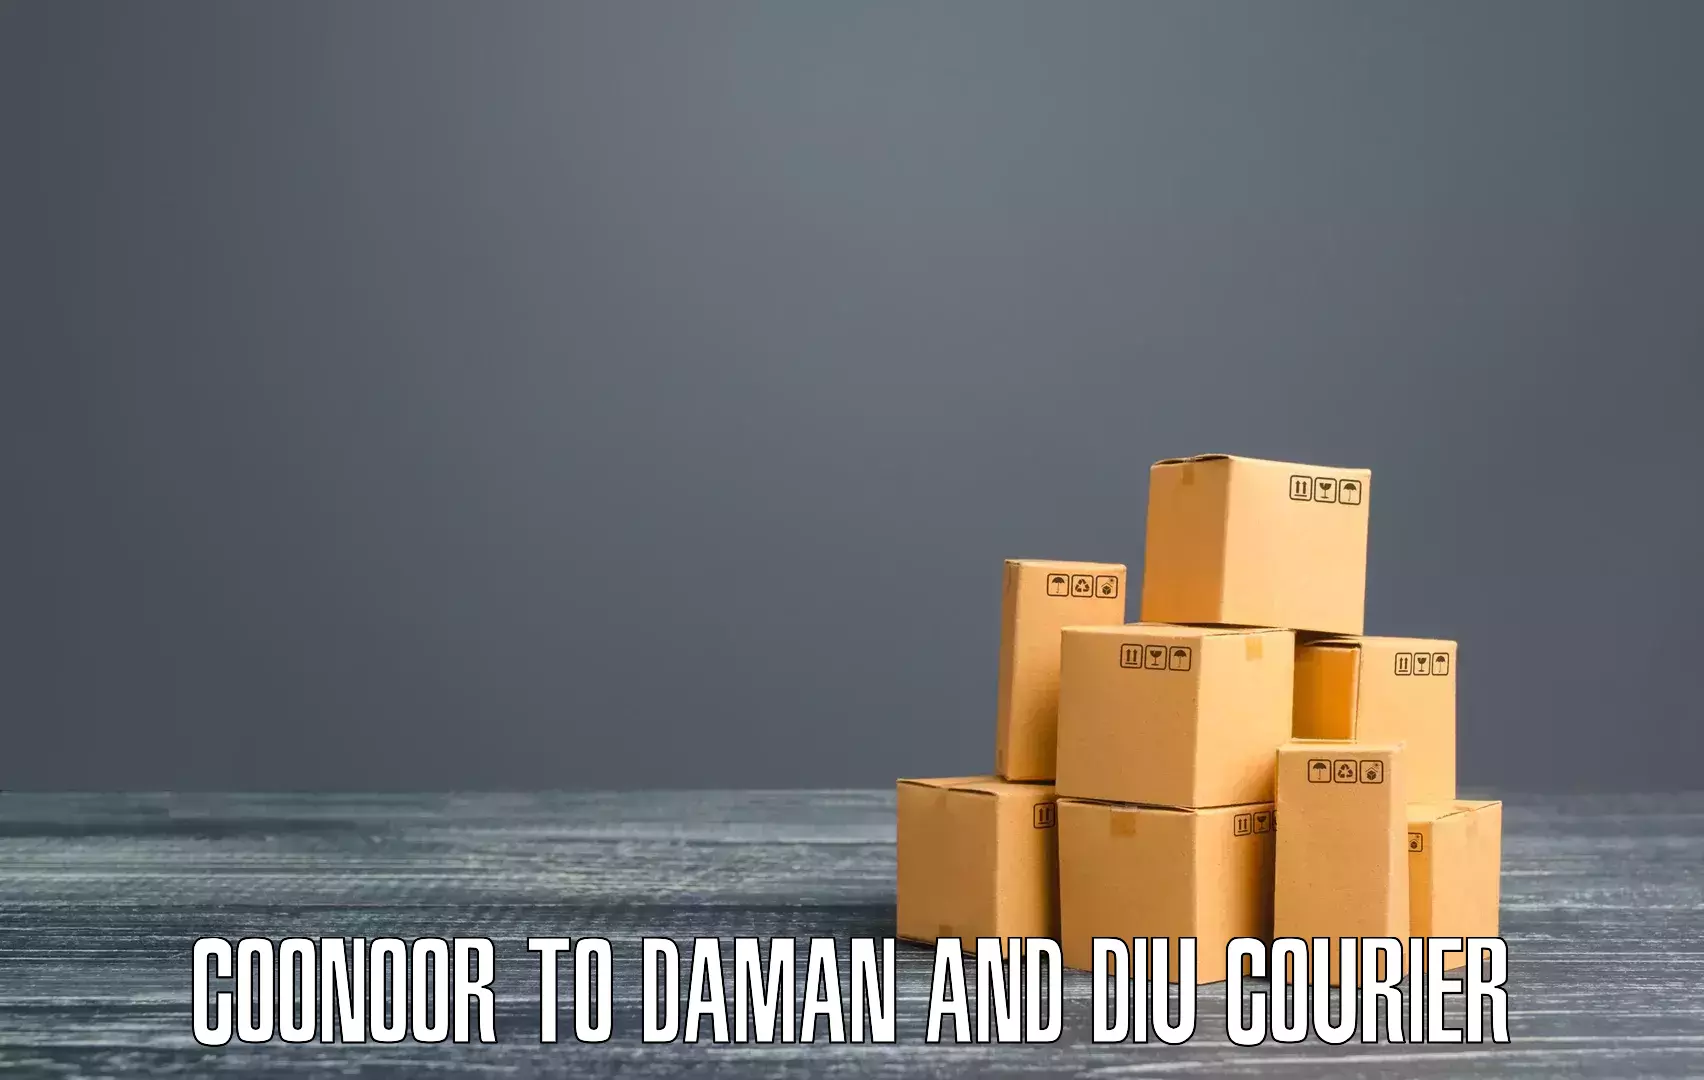 Quick dispatch service in Coonoor to Daman and Diu